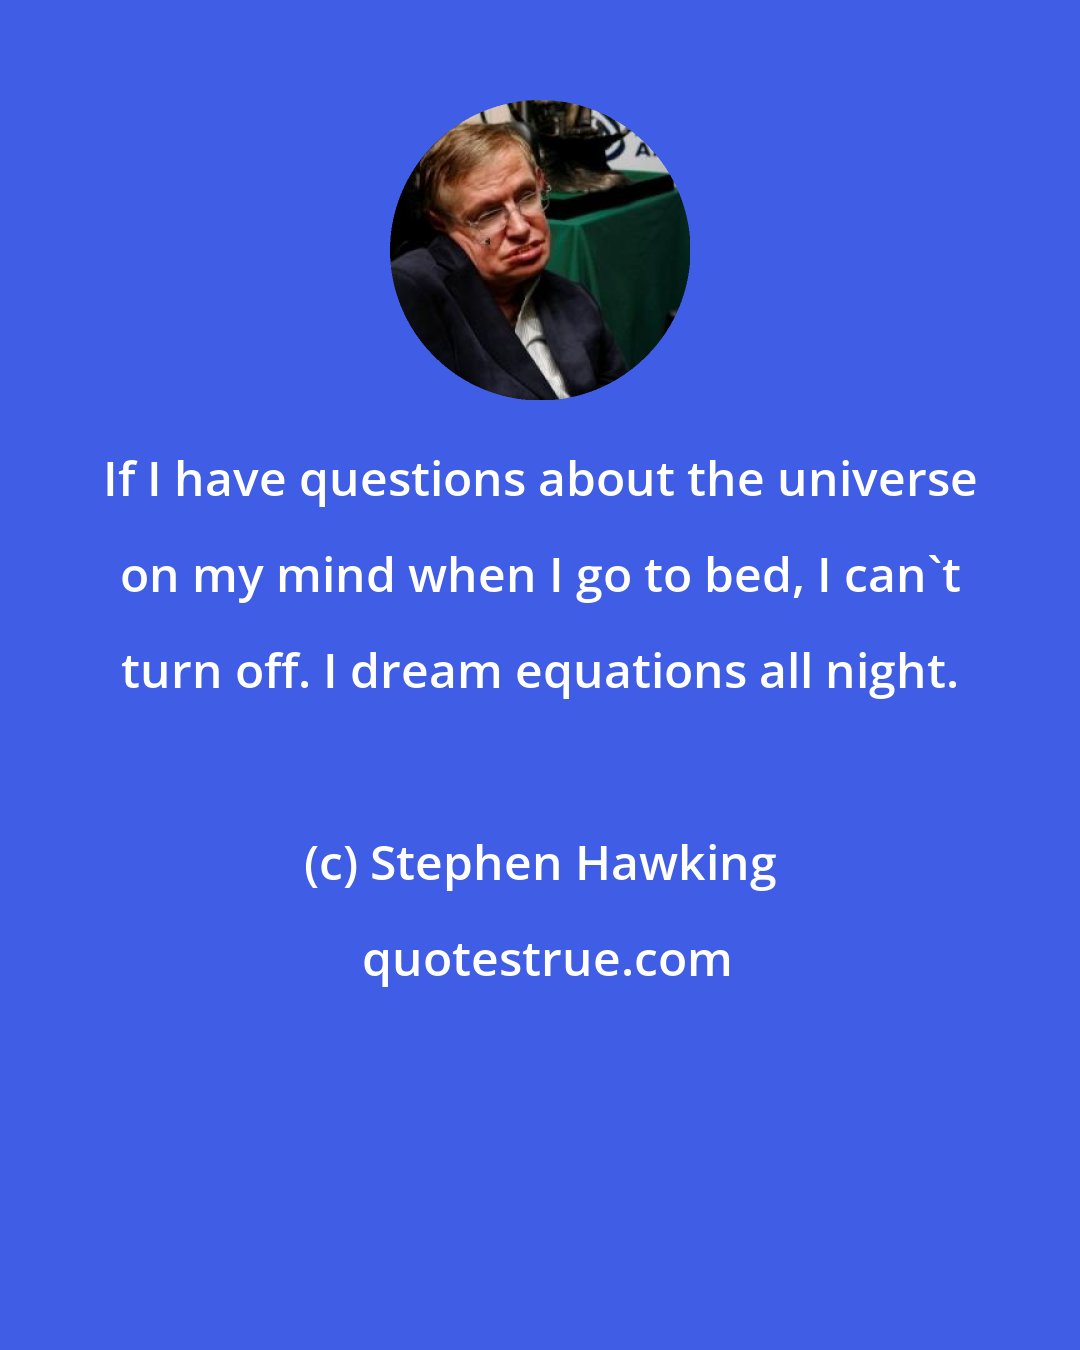 Stephen Hawking: If I have questions about the universe on my mind when I go to bed, I can't turn off. I dream equations all night.